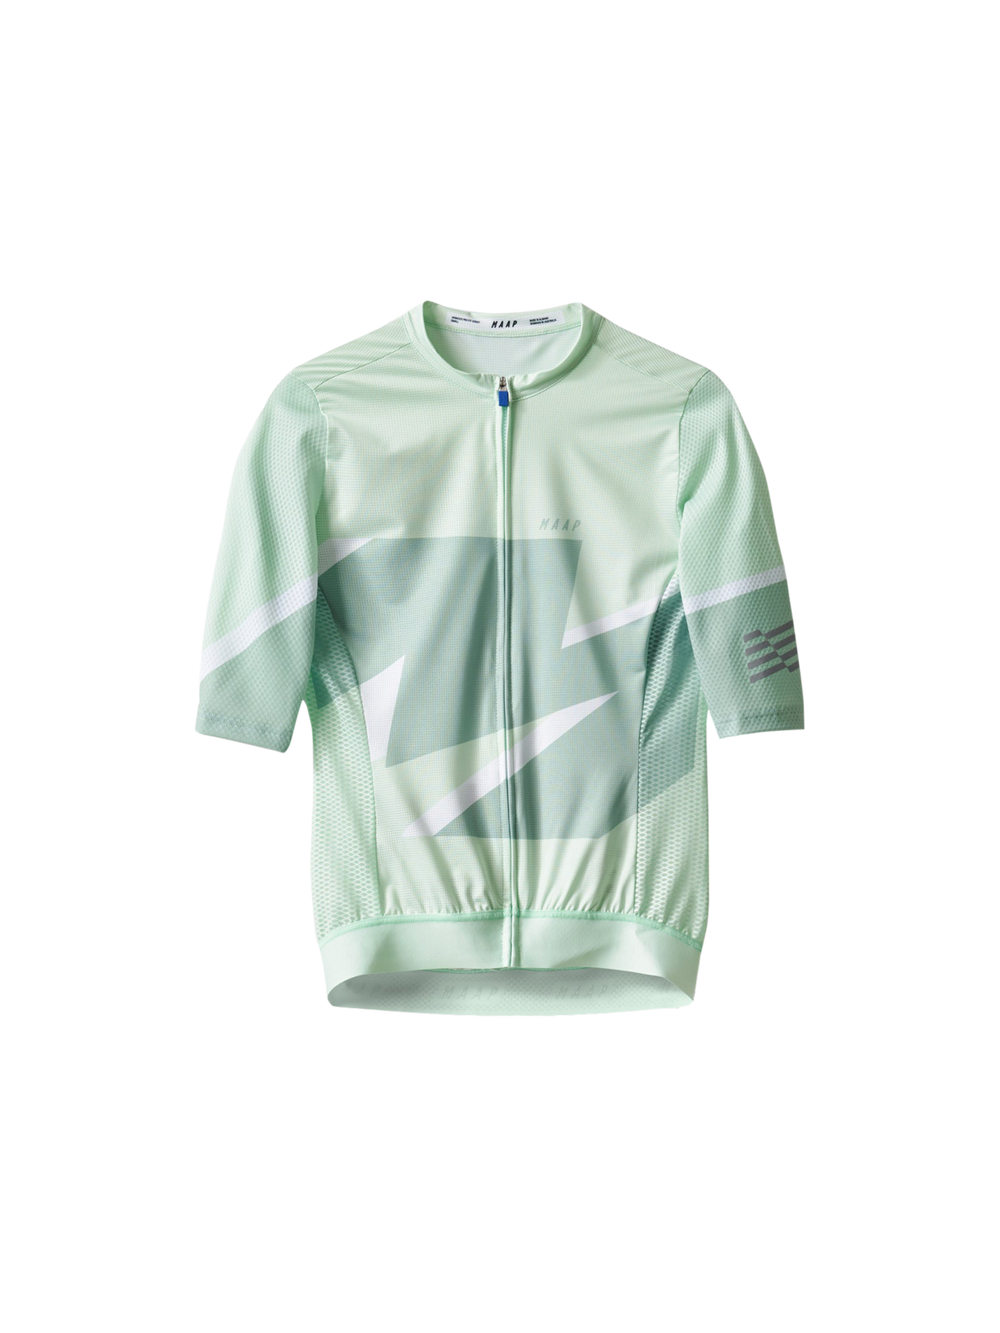 Product Image for Women's Evolve 3D Pro Air Jersey